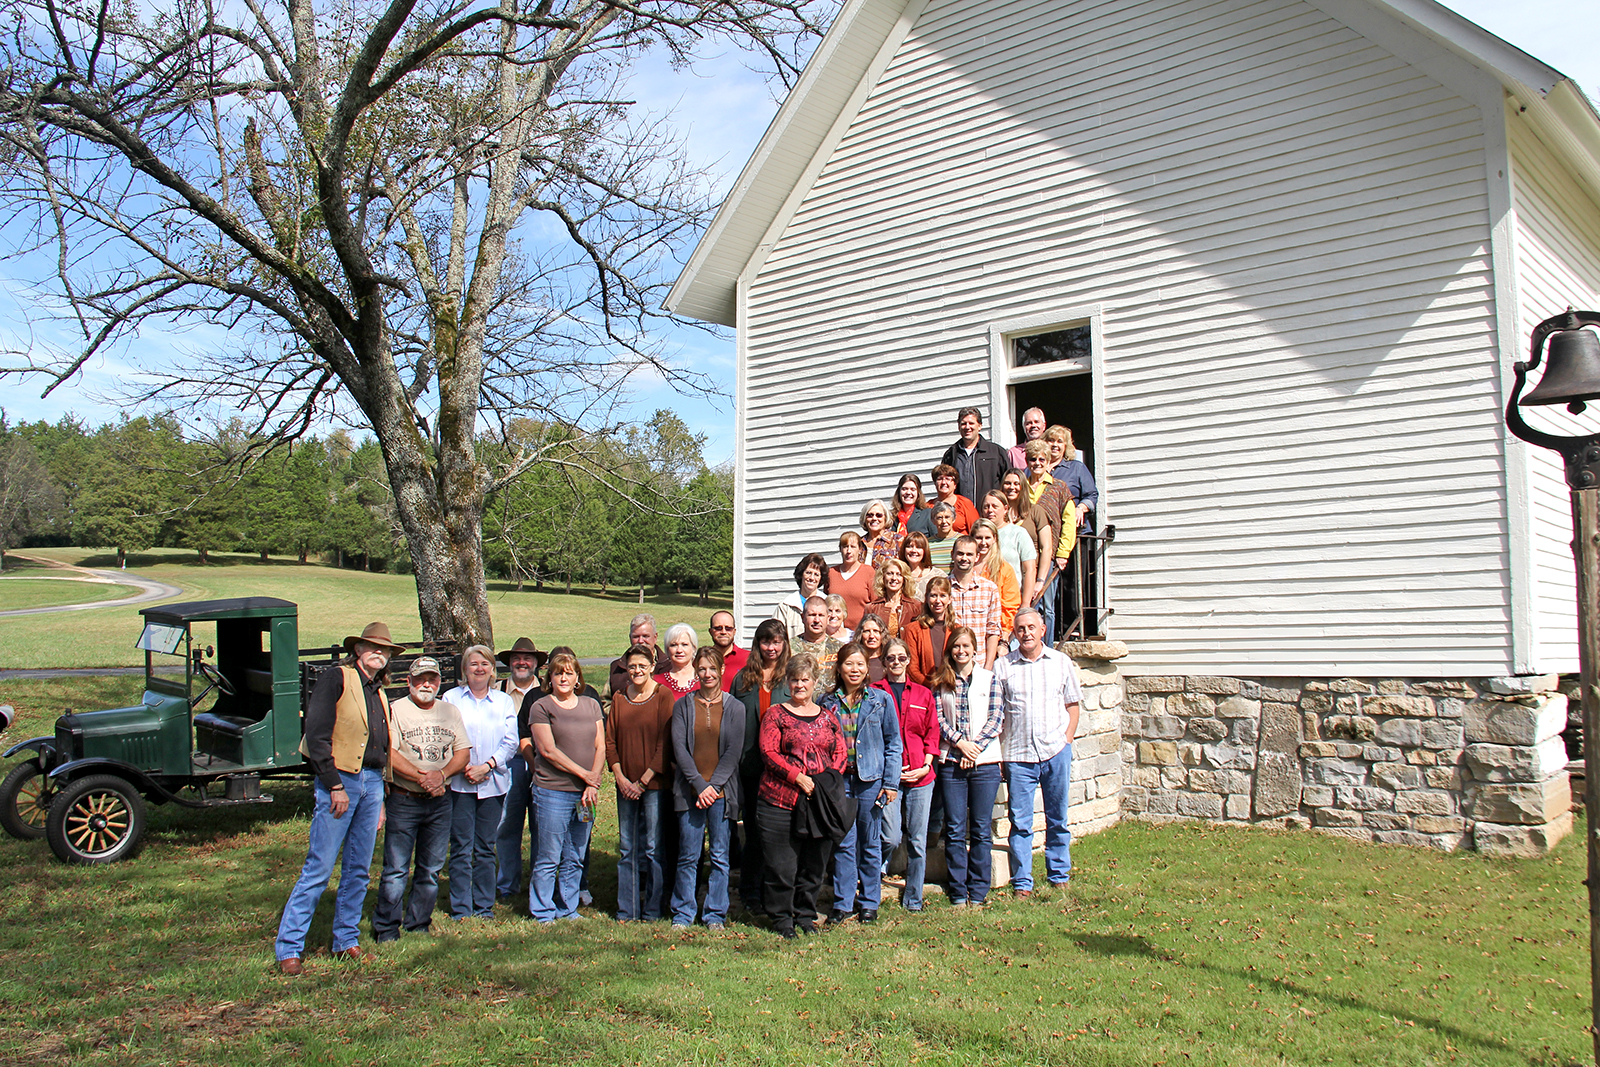 Colonel Littleton company photo standing in front of the one-room schoolhouse on Foxfire Farm in Lynnville, TN